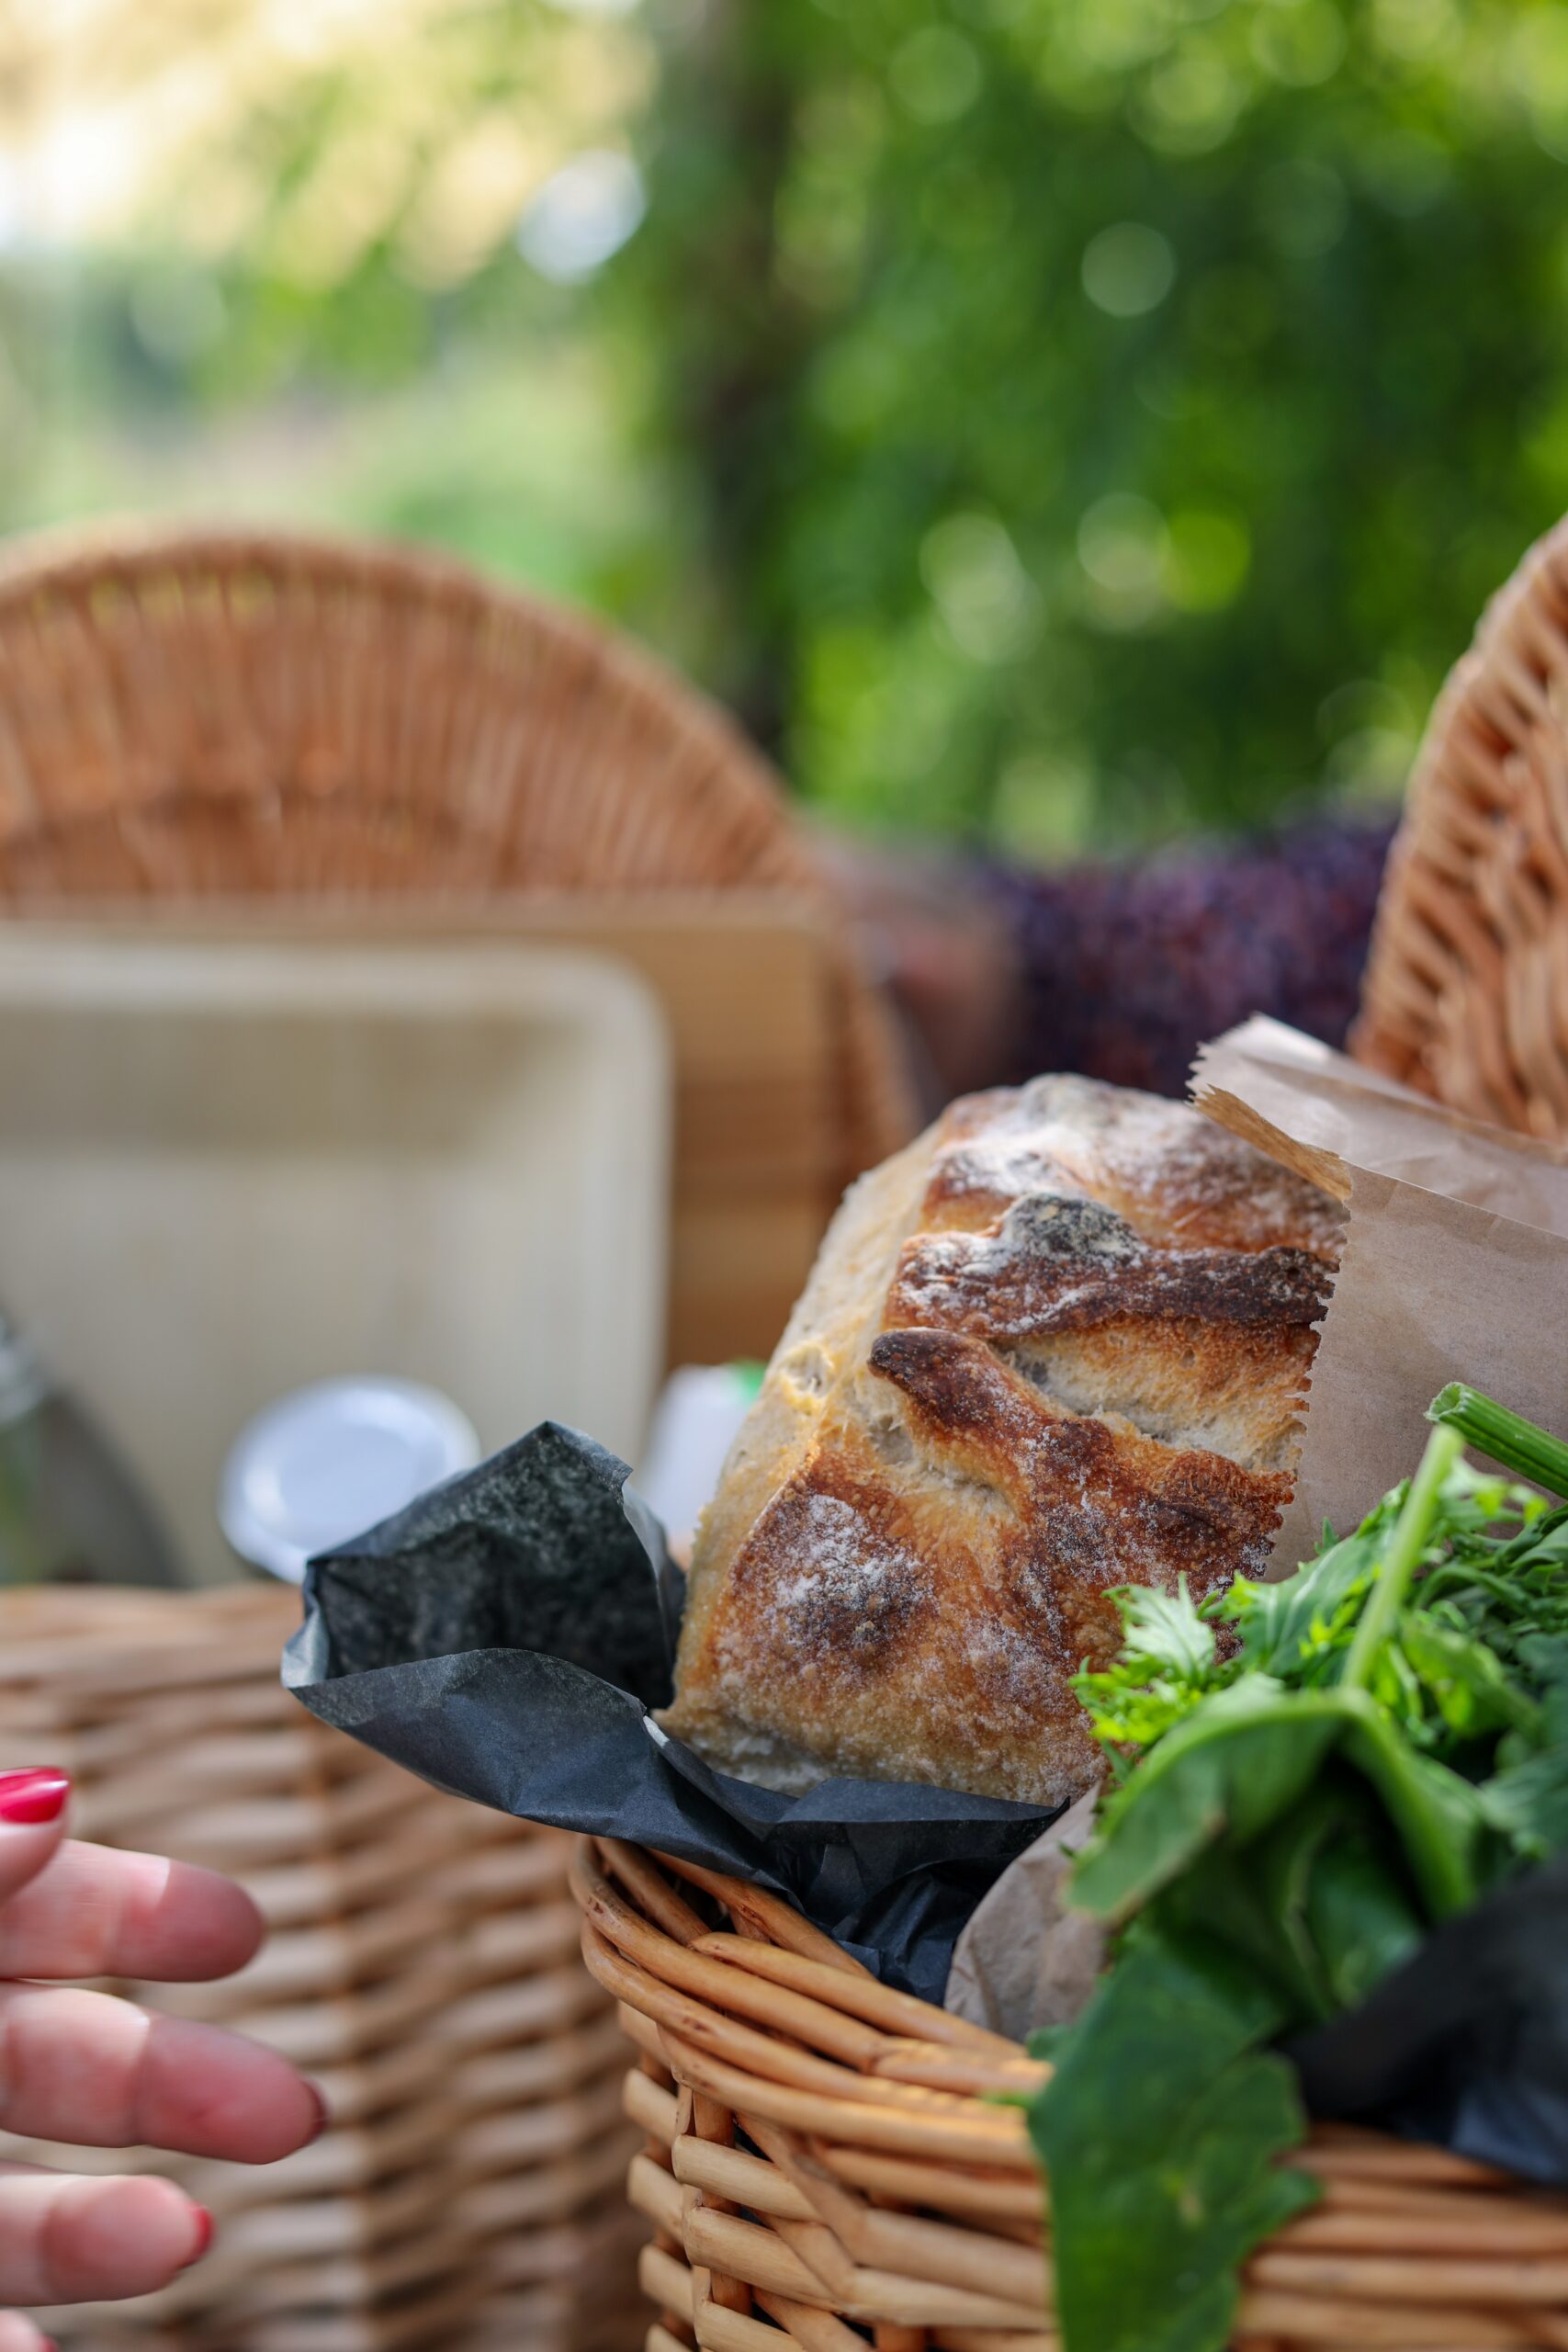 picnic basket filled with bread and salad